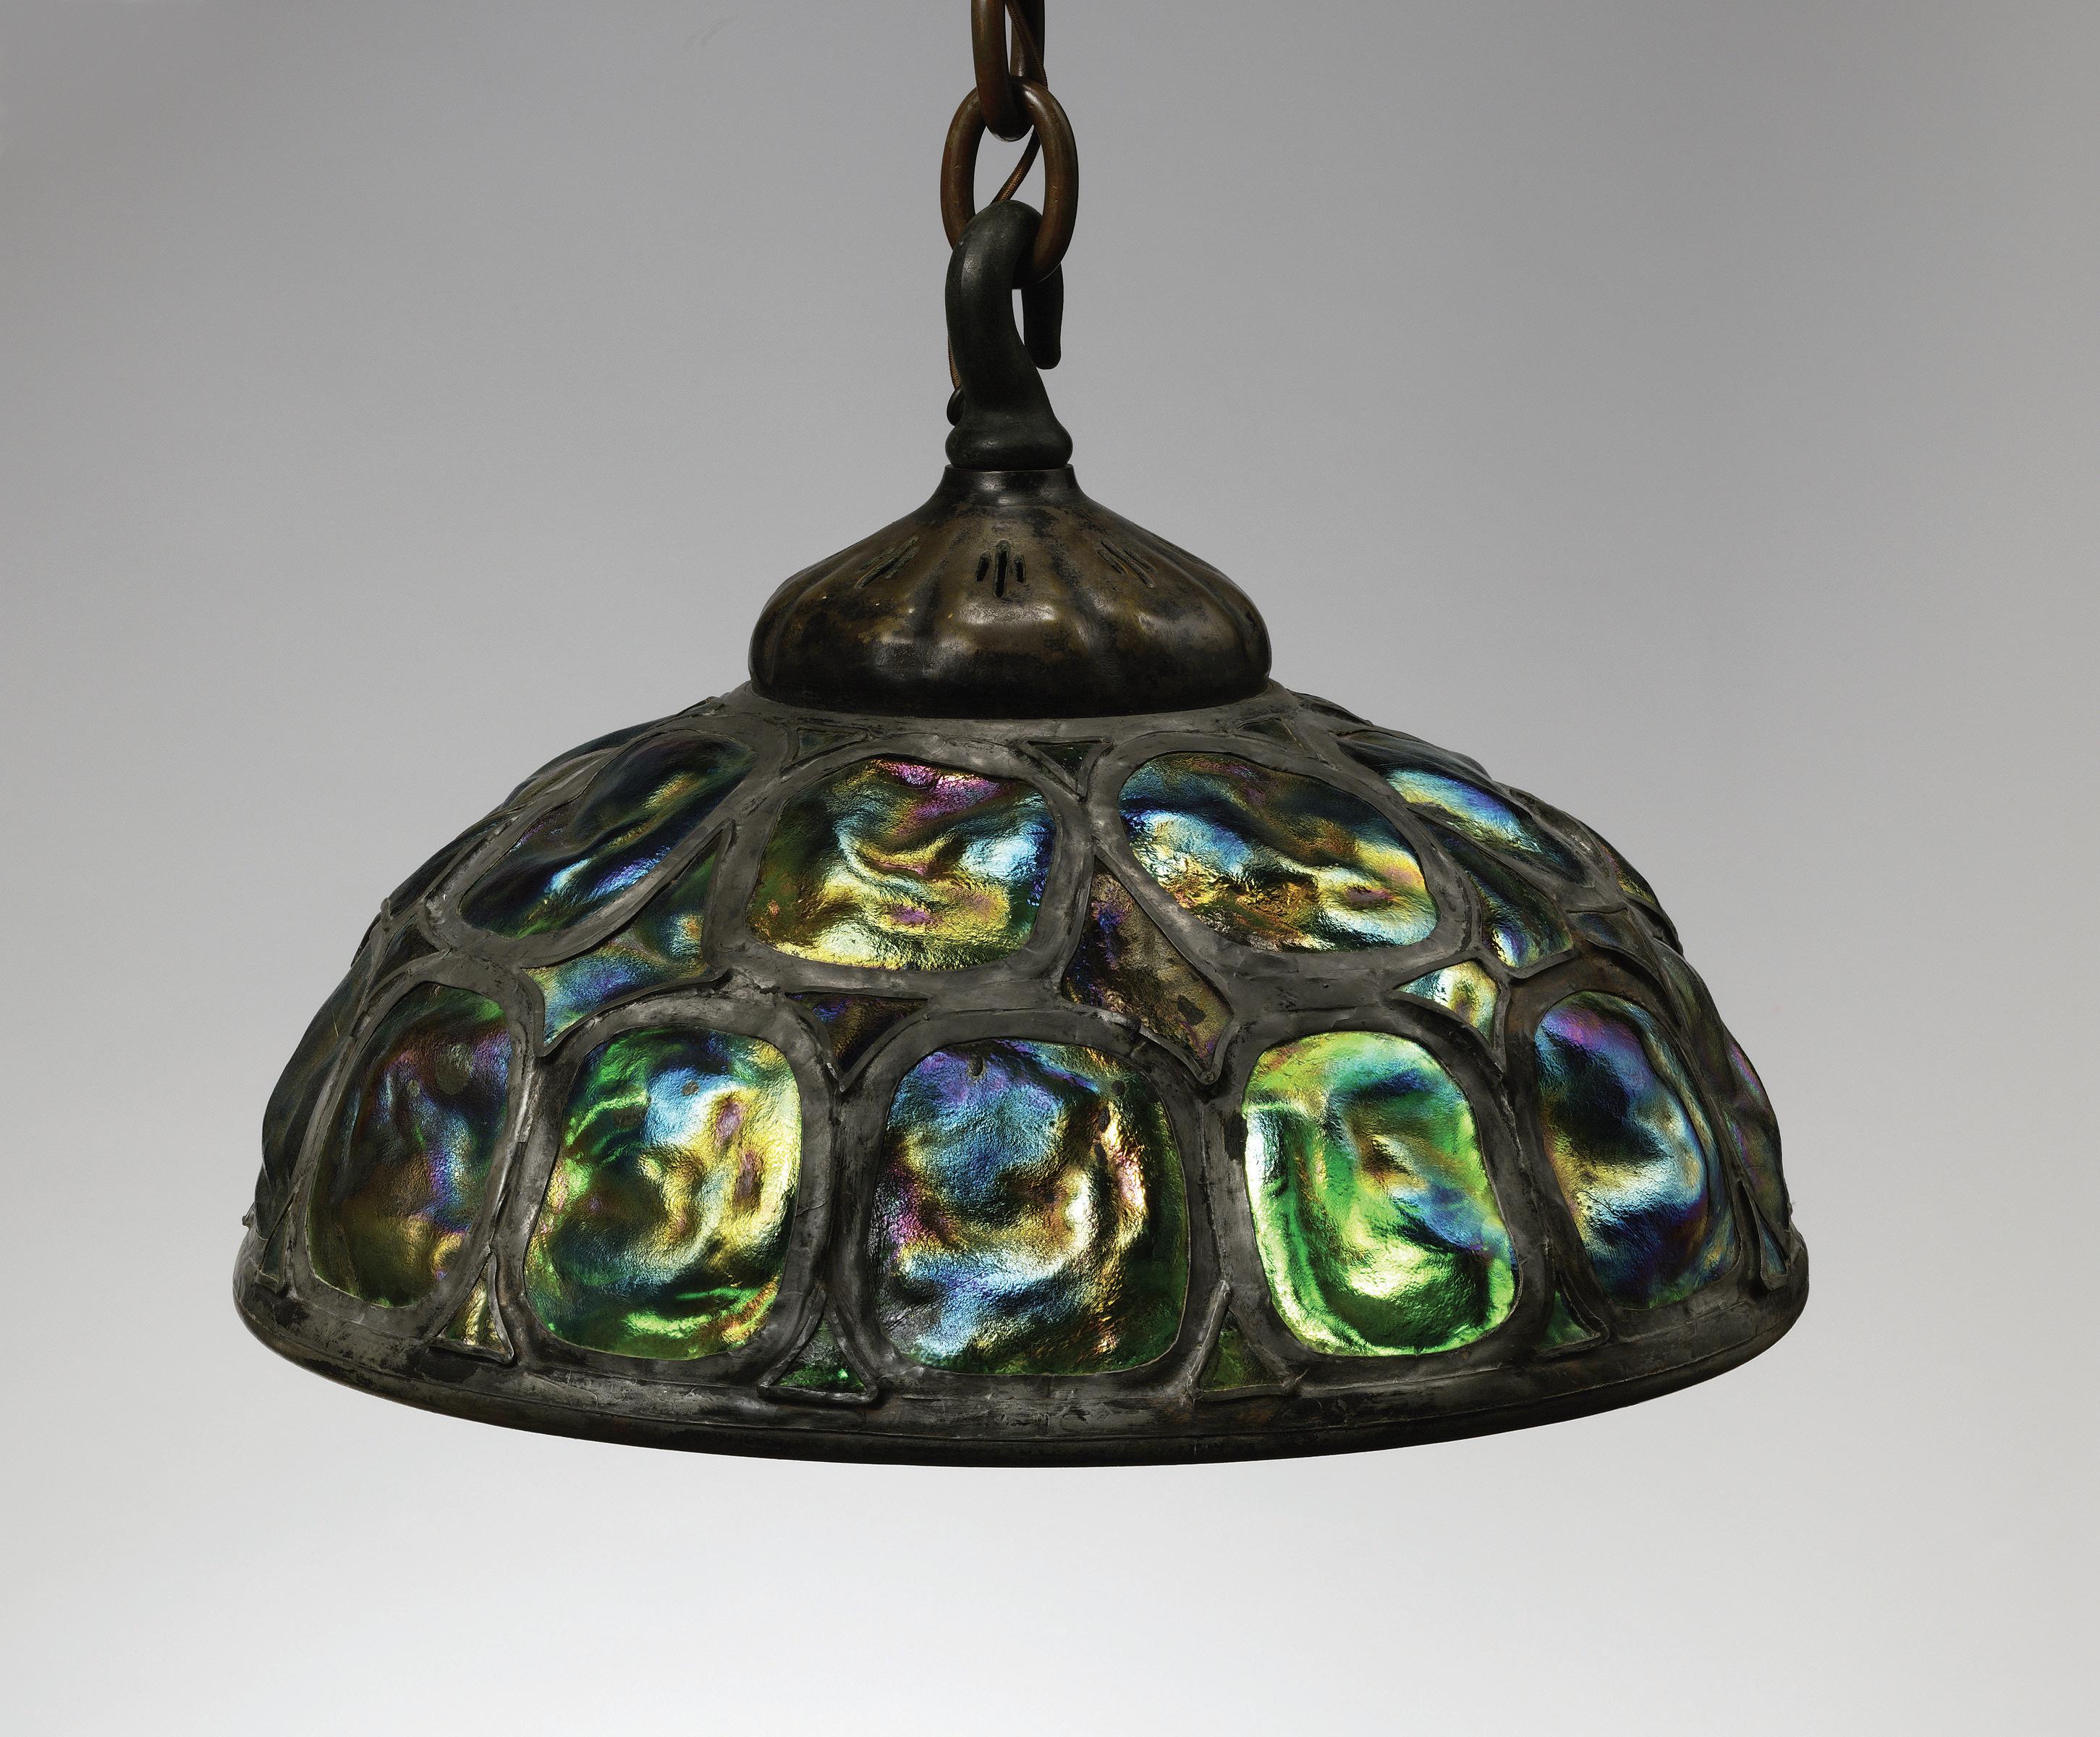 The Story of Louis Comfort Tiffany's Medusa